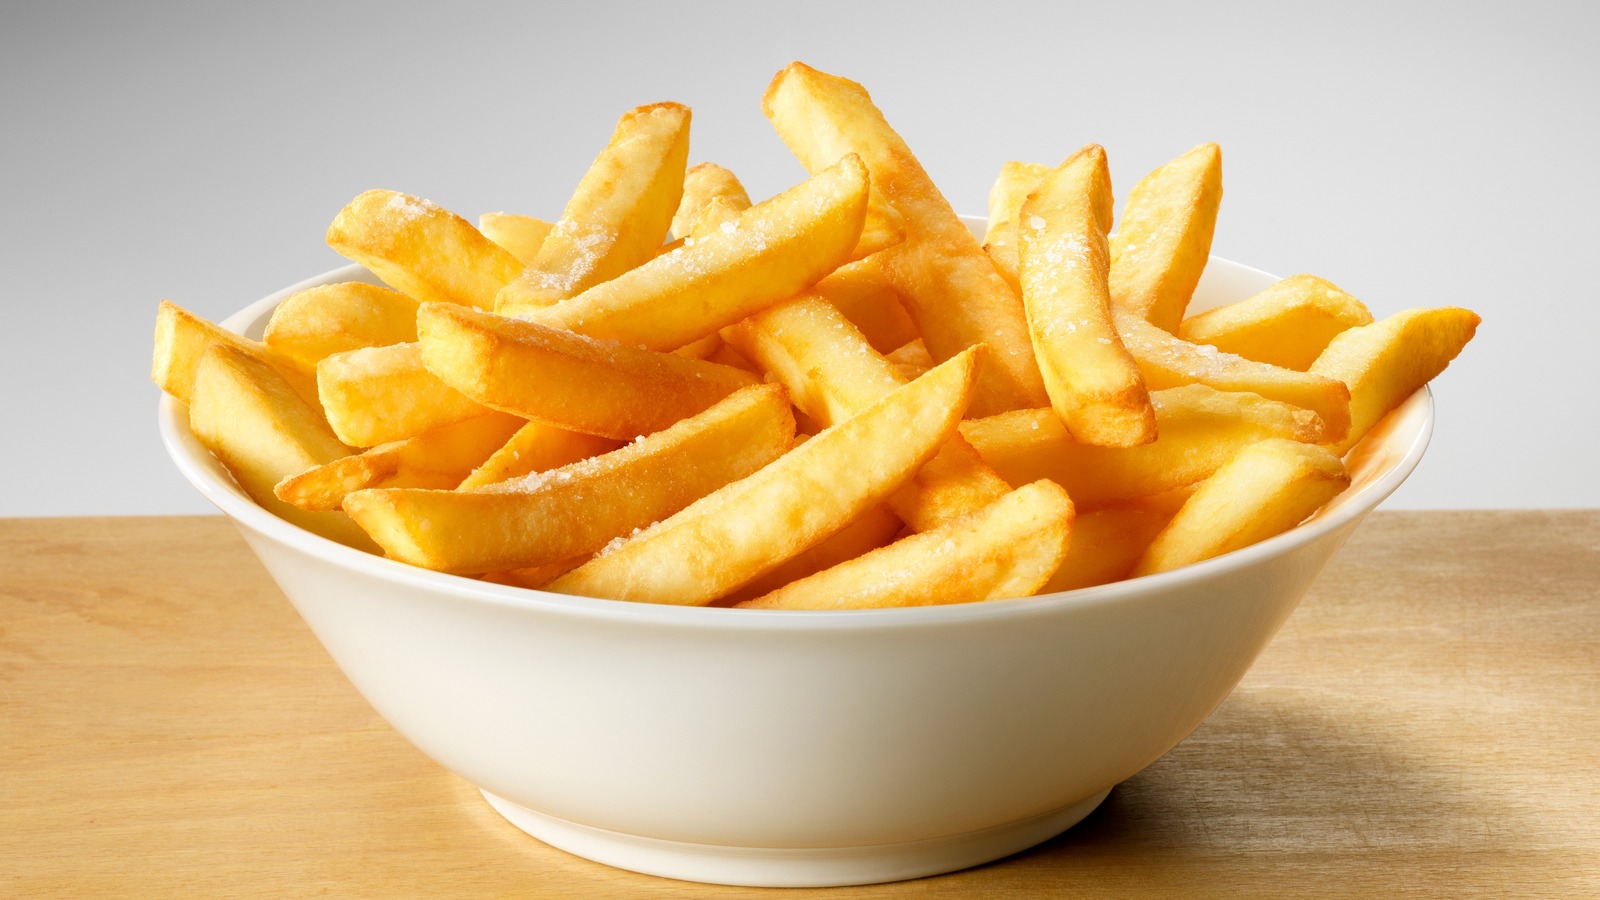 https://www.thedailymeal.com/img/gallery/a-ranking-of-the-best-frozen-french-fries/l-intro-1673491697.jpg